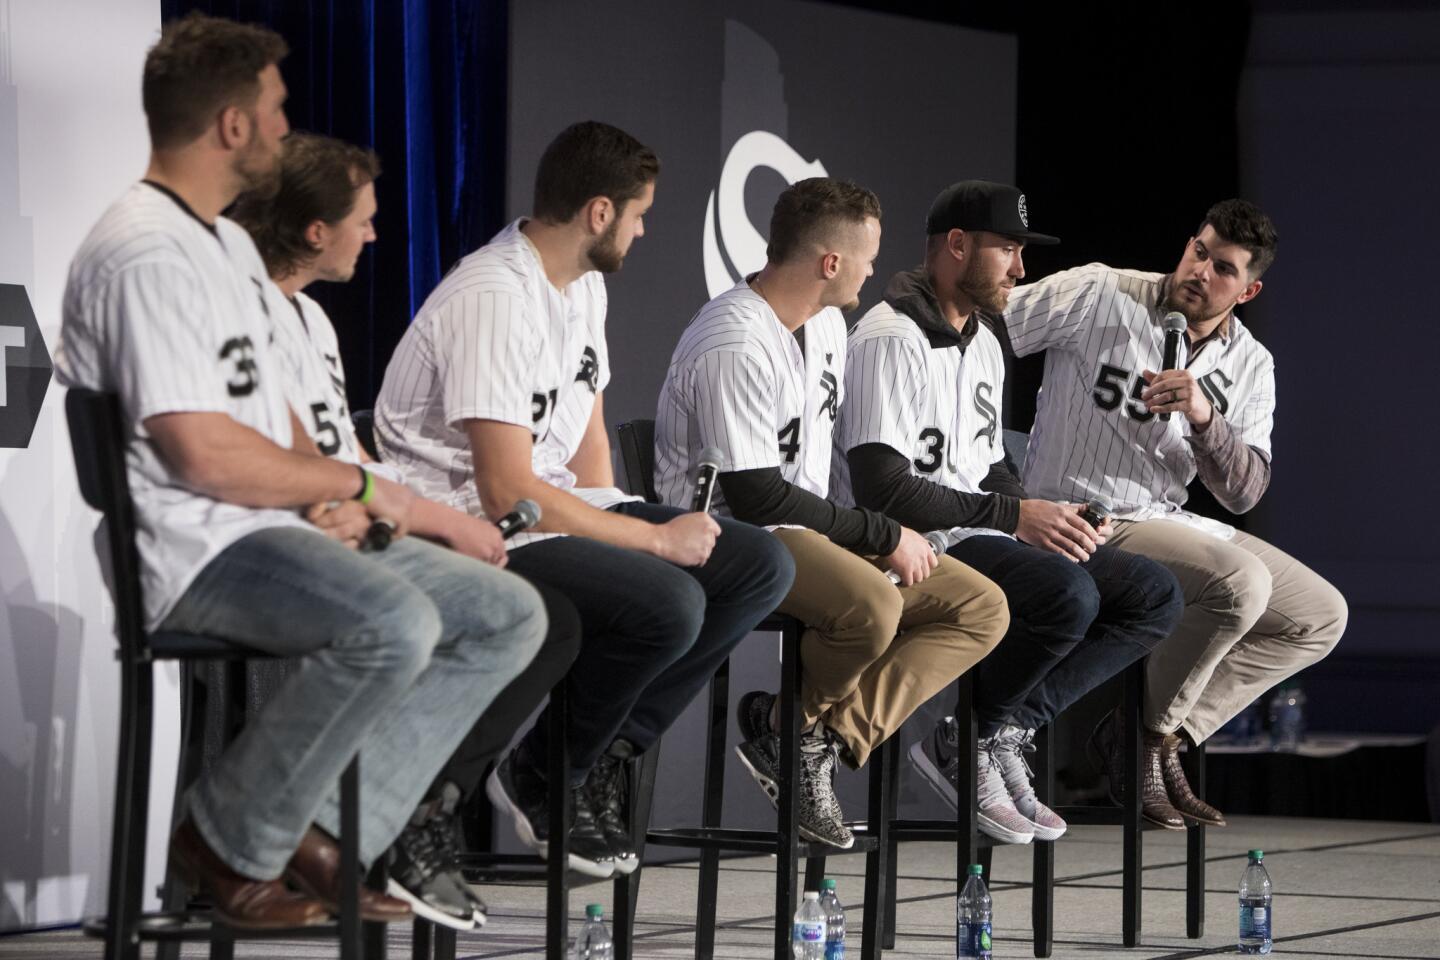 White Sox teammates Kevan Smith, left, Carson Fulmer, Lucas Giolito, Adam Engel, Nicky Delmonico and Carlos Rodon participate in a seminar during SoxFest 2018 at the Hilton Chicago on Saturday, Jan. 27, 2018.